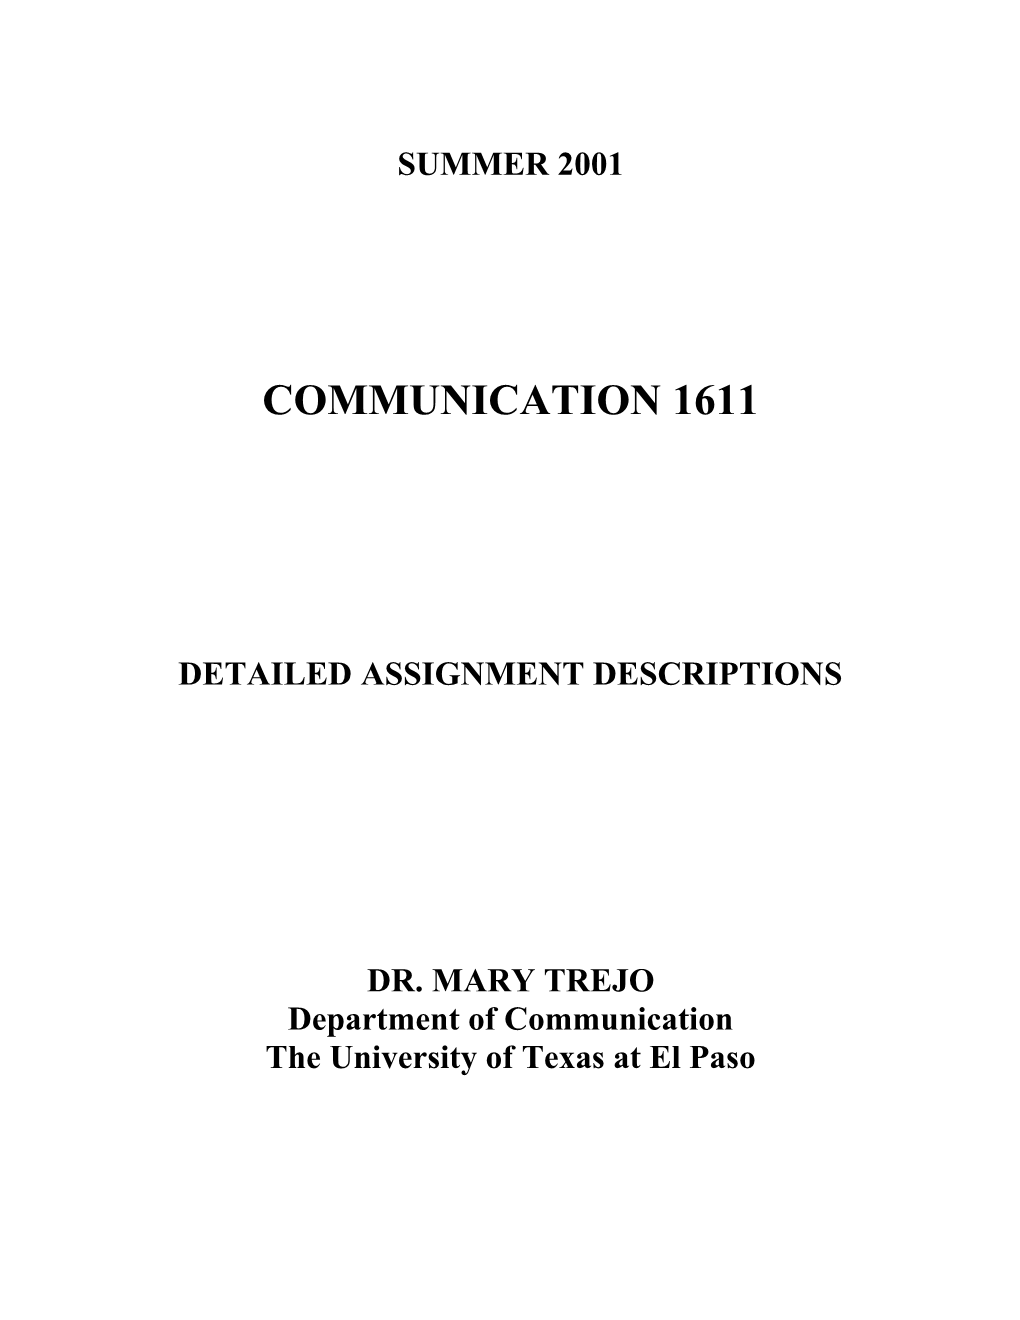 Communication 6111, Written and Oral Communication